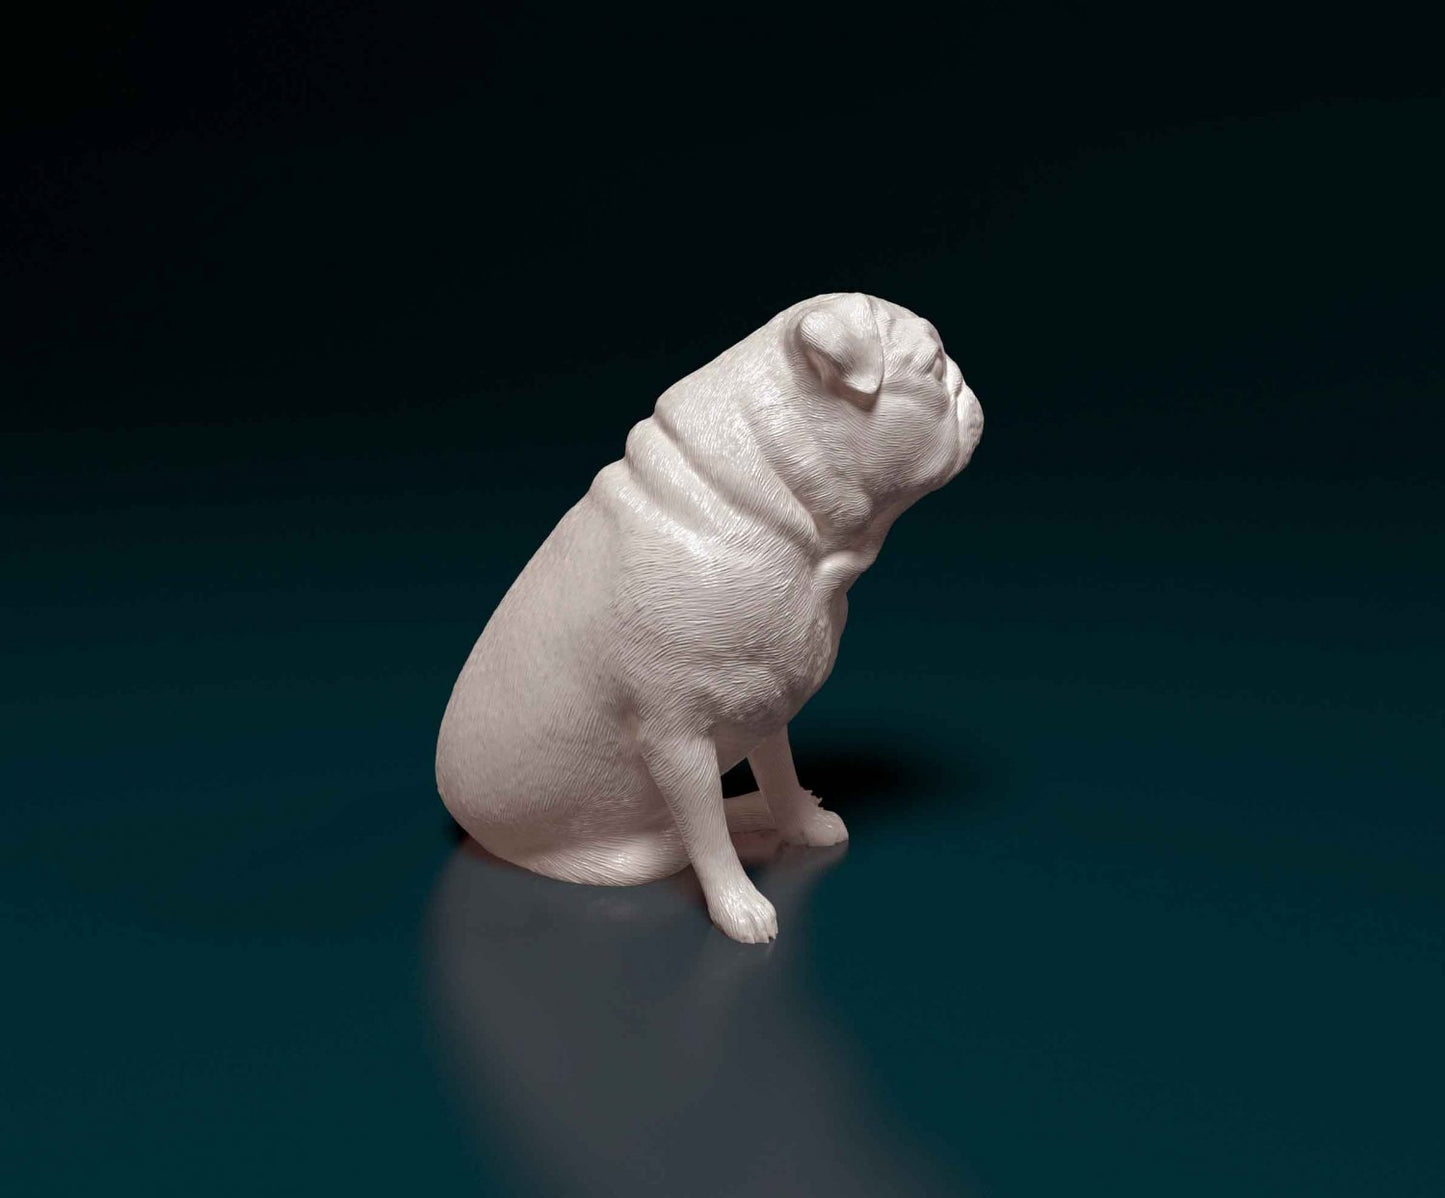 Pug artist resin - white resin ready to prep / paint ALL SCALES